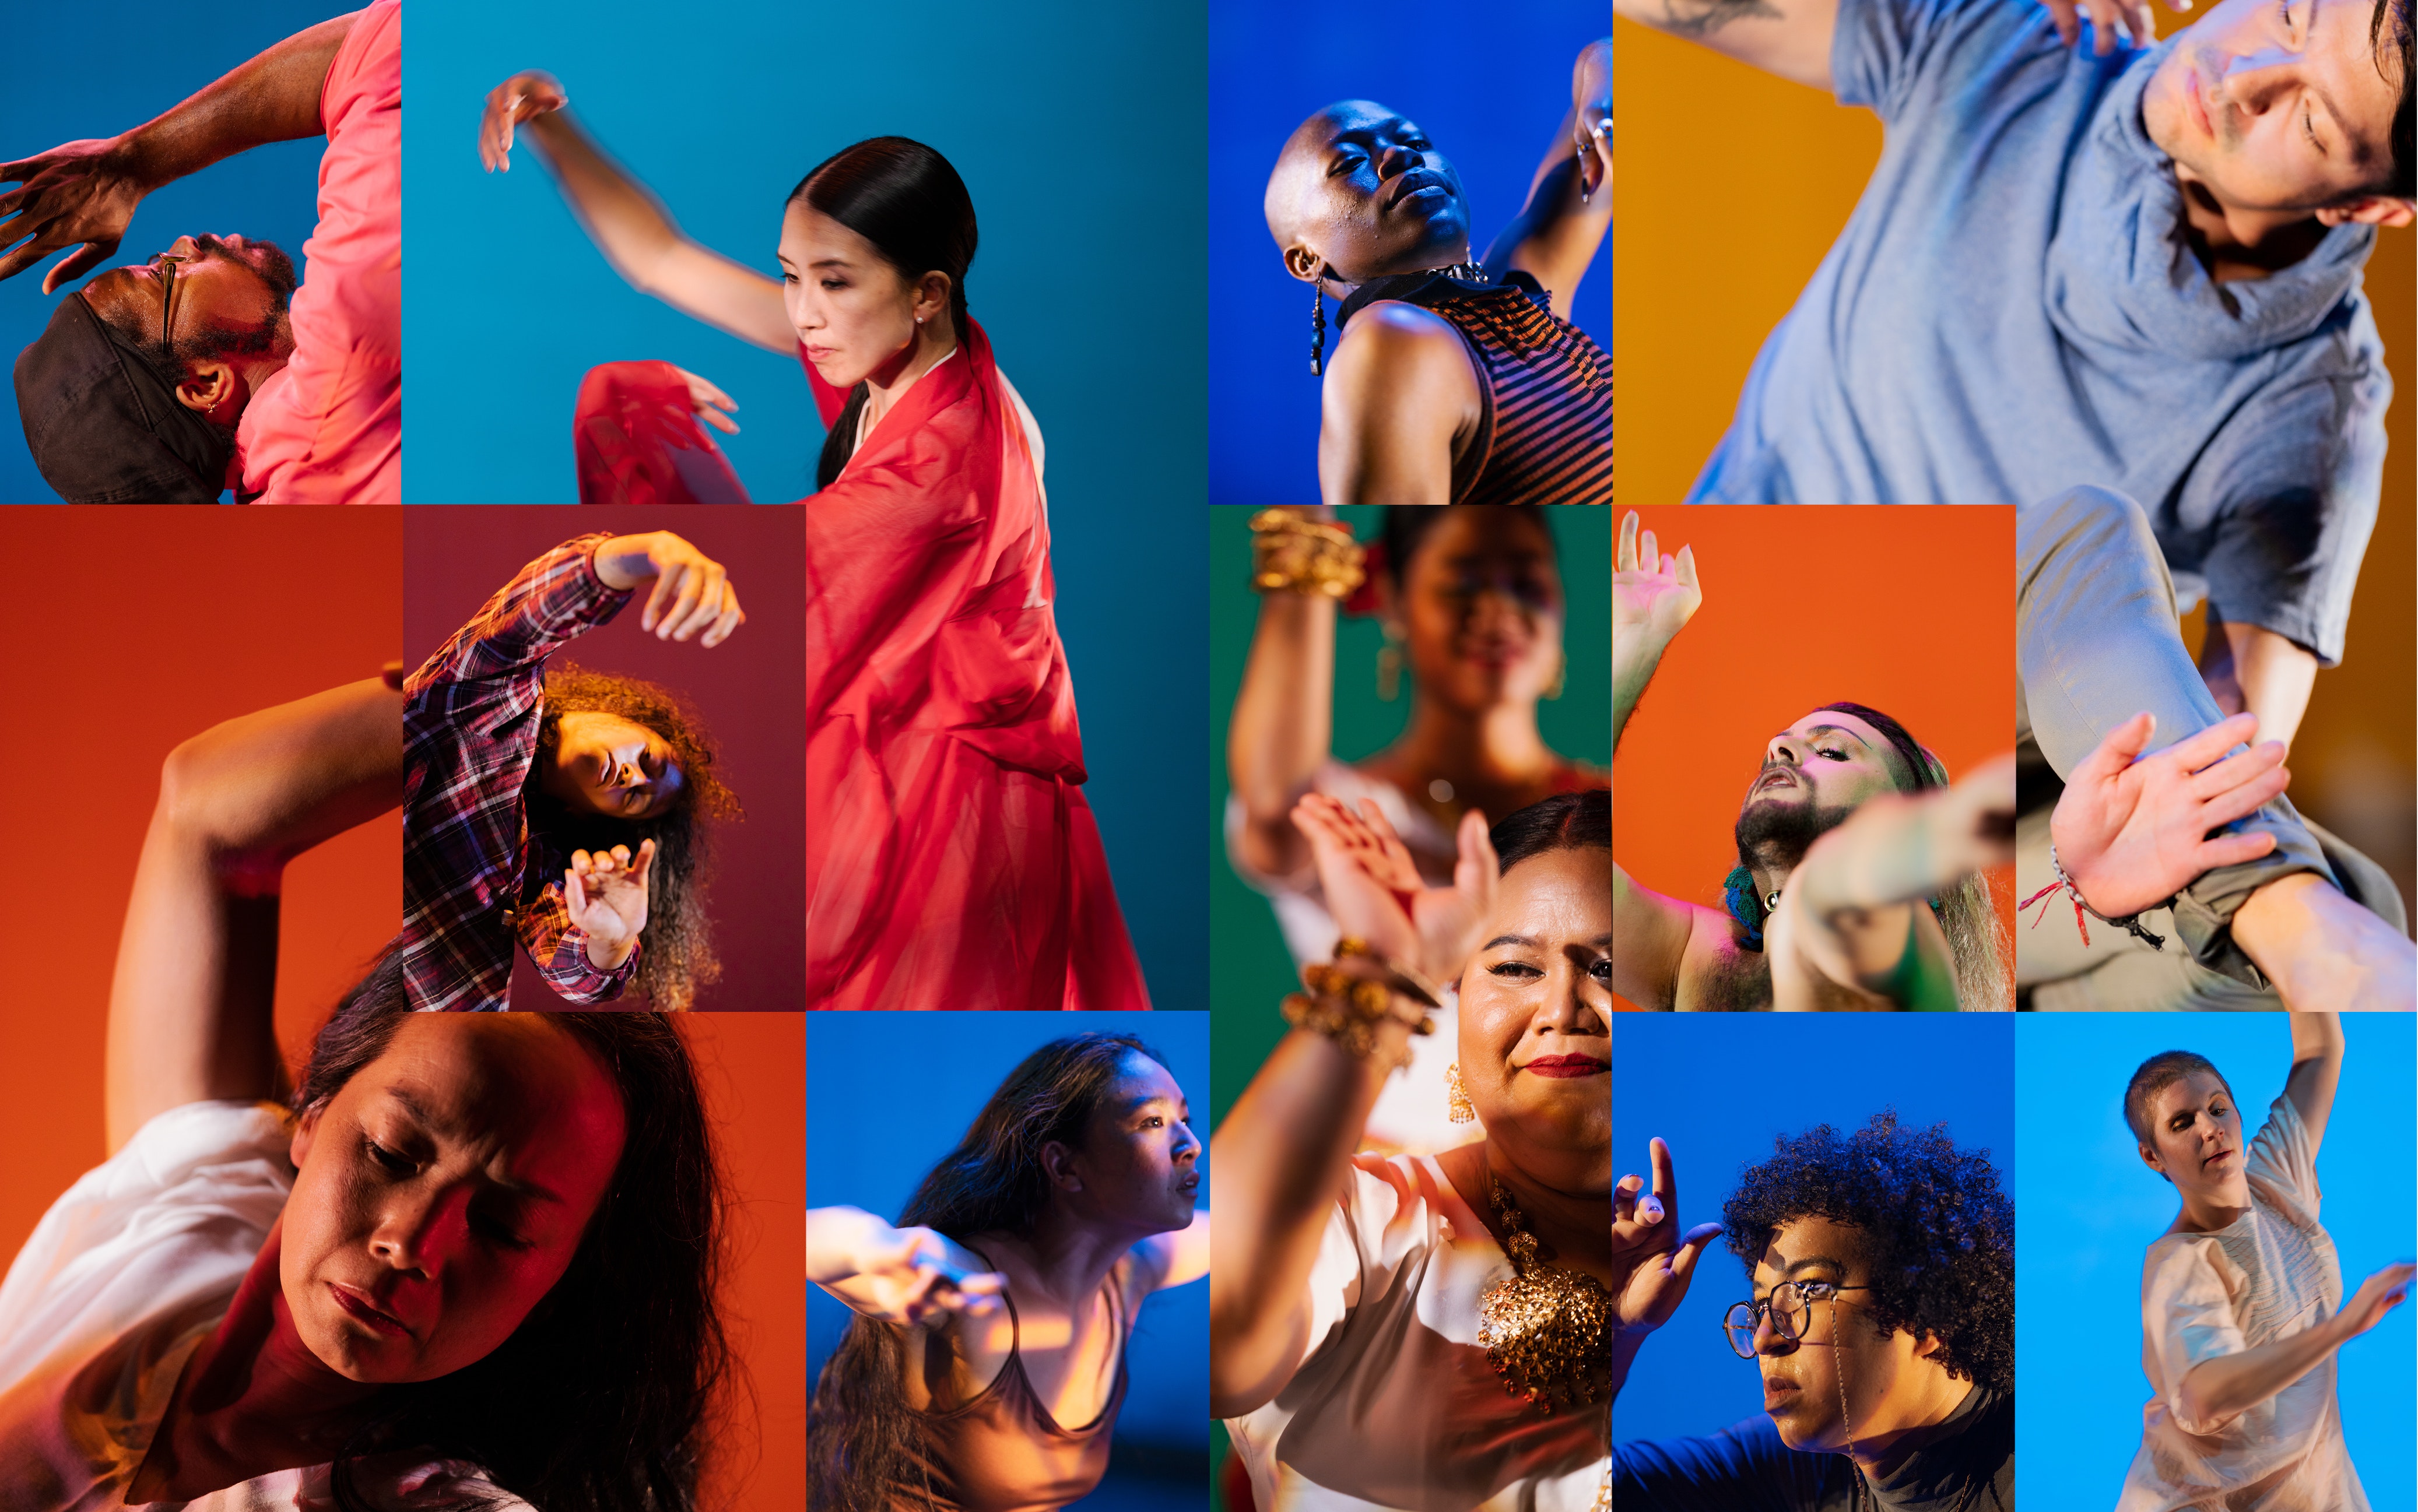 Grid of 11 images of dancers in various poses on different colored backgrounds